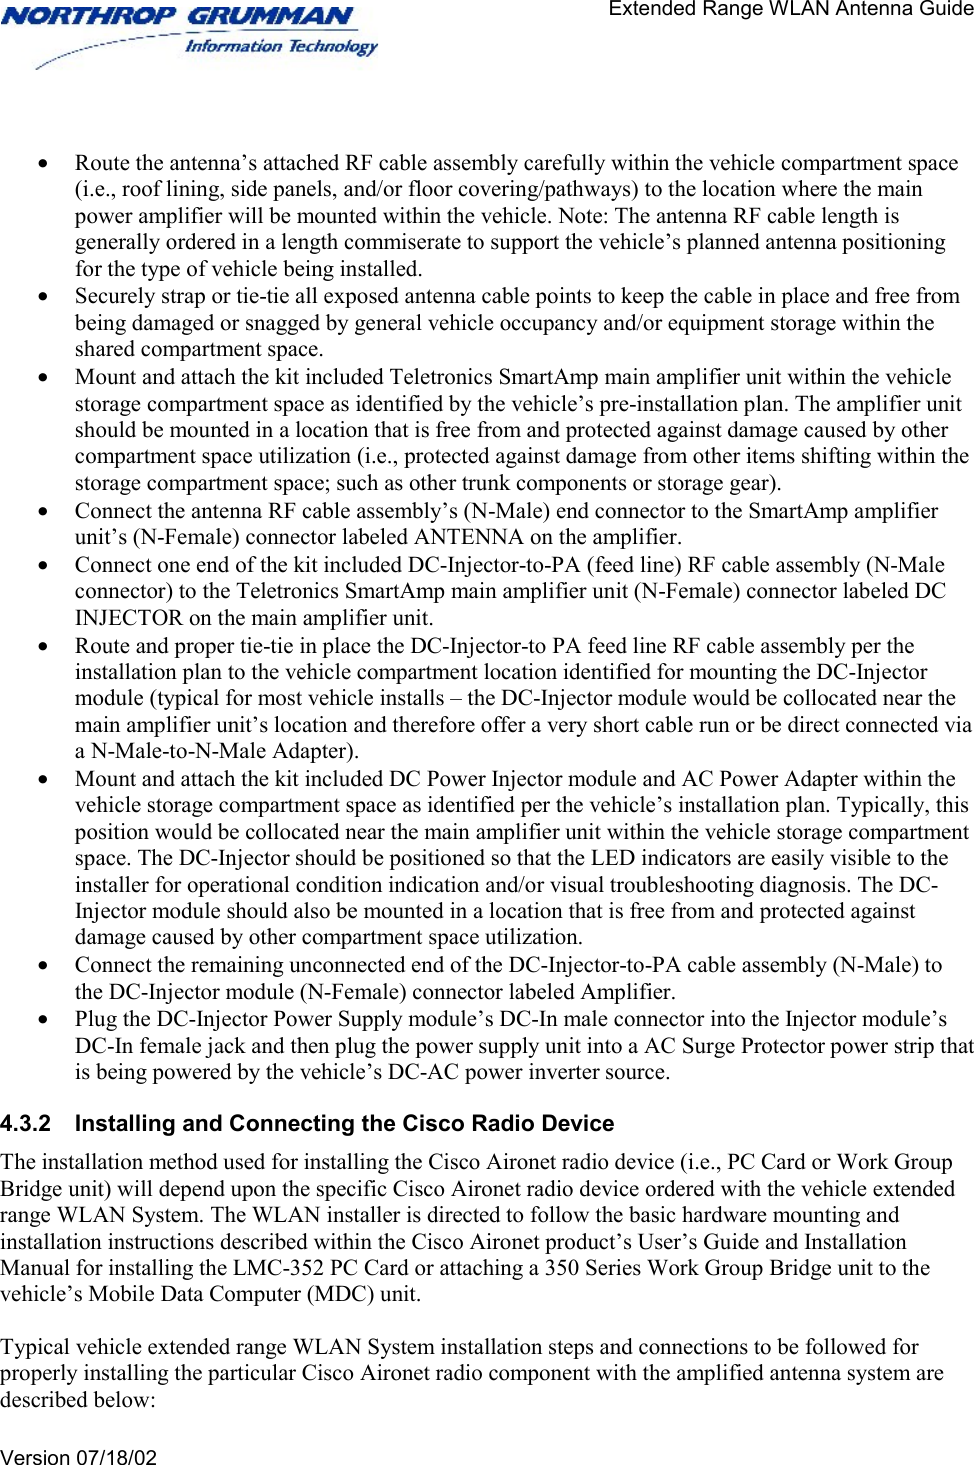                                       Extended Range WLAN Antenna Guide   Version 07/18/02    •  Route the antenna’s attached RF cable assembly carefully within the vehicle compartment space (i.e., roof lining, side panels, and/or floor covering/pathways) to the location where the main power amplifier will be mounted within the vehicle. Note: The antenna RF cable length is generally ordered in a length commiserate to support the vehicle’s planned antenna positioning for the type of vehicle being installed.  •  Securely strap or tie-tie all exposed antenna cable points to keep the cable in place and free from being damaged or snagged by general vehicle occupancy and/or equipment storage within the shared compartment space.  •  Mount and attach the kit included Teletronics SmartAmp main amplifier unit within the vehicle storage compartment space as identified by the vehicle’s pre-installation plan. The amplifier unit should be mounted in a location that is free from and protected against damage caused by other compartment space utilization (i.e., protected against damage from other items shifting within the storage compartment space; such as other trunk components or storage gear).  •  Connect the antenna RF cable assembly’s (N-Male) end connector to the SmartAmp amplifier unit’s (N-Female) connector labeled ANTENNA on the amplifier.  •  Connect one end of the kit included DC-Injector-to-PA (feed line) RF cable assembly (N-Male connector) to the Teletronics SmartAmp main amplifier unit (N-Female) connector labeled DC INJECTOR on the main amplifier unit.  •  Route and proper tie-tie in place the DC-Injector-to PA feed line RF cable assembly per the installation plan to the vehicle compartment location identified for mounting the DC-Injector module (typical for most vehicle installs – the DC-Injector module would be collocated near the main amplifier unit’s location and therefore offer a very short cable run or be direct connected via a N-Male-to-N-Male Adapter). •  Mount and attach the kit included DC Power Injector module and AC Power Adapter within the vehicle storage compartment space as identified per the vehicle’s installation plan. Typically, this position would be collocated near the main amplifier unit within the vehicle storage compartment space. The DC-Injector should be positioned so that the LED indicators are easily visible to the installer for operational condition indication and/or visual troubleshooting diagnosis. The DC-Injector module should also be mounted in a location that is free from and protected against damage caused by other compartment space utilization.   •  Connect the remaining unconnected end of the DC-Injector-to-PA cable assembly (N-Male) to the DC-Injector module (N-Female) connector labeled Amplifier.  •  Plug the DC-Injector Power Supply module’s DC-In male connector into the Injector module’s DC-In female jack and then plug the power supply unit into a AC Surge Protector power strip that is being powered by the vehicle’s DC-AC power inverter source.  4.3.2  Installing and Connecting the Cisco Radio Device The installation method used for installing the Cisco Aironet radio device (i.e., PC Card or Work Group Bridge unit) will depend upon the specific Cisco Aironet radio device ordered with the vehicle extended range WLAN System. The WLAN installer is directed to follow the basic hardware mounting and installation instructions described within the Cisco Aironet product’s User’s Guide and Installation Manual for installing the LMC-352 PC Card or attaching a 350 Series Work Group Bridge unit to the vehicle’s Mobile Data Computer (MDC) unit.  Typical vehicle extended range WLAN System installation steps and connections to be followed for properly installing the particular Cisco Aironet radio component with the amplified antenna system are described below:  